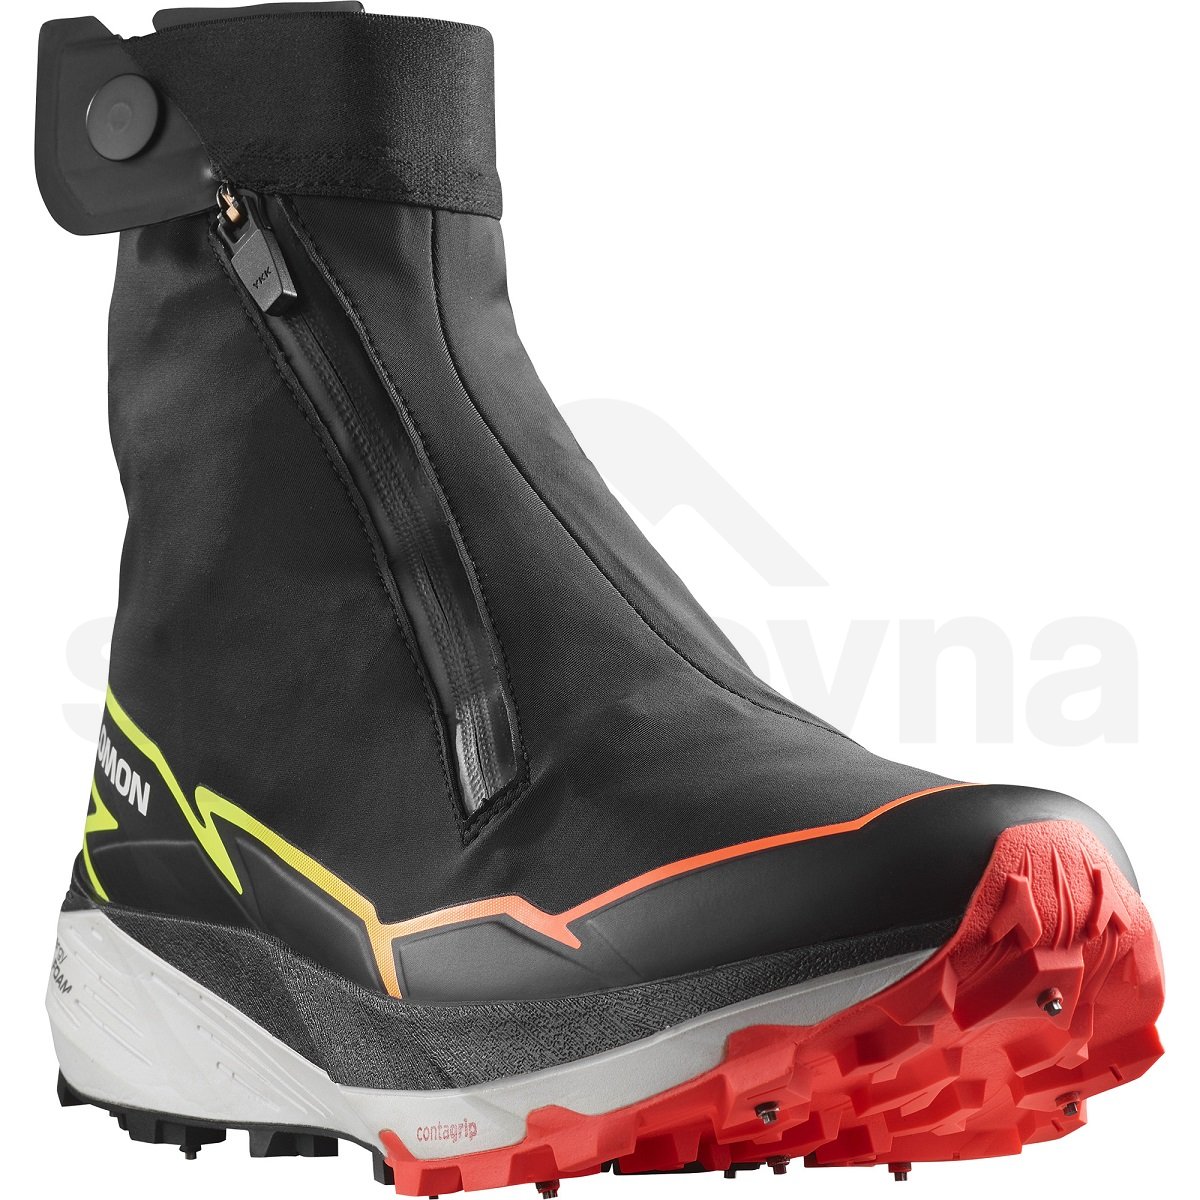 L47307300_5_GHO_WINTER CROSS SPIKEBlack_Fiery Coral_Safety Yellow.png.high-res